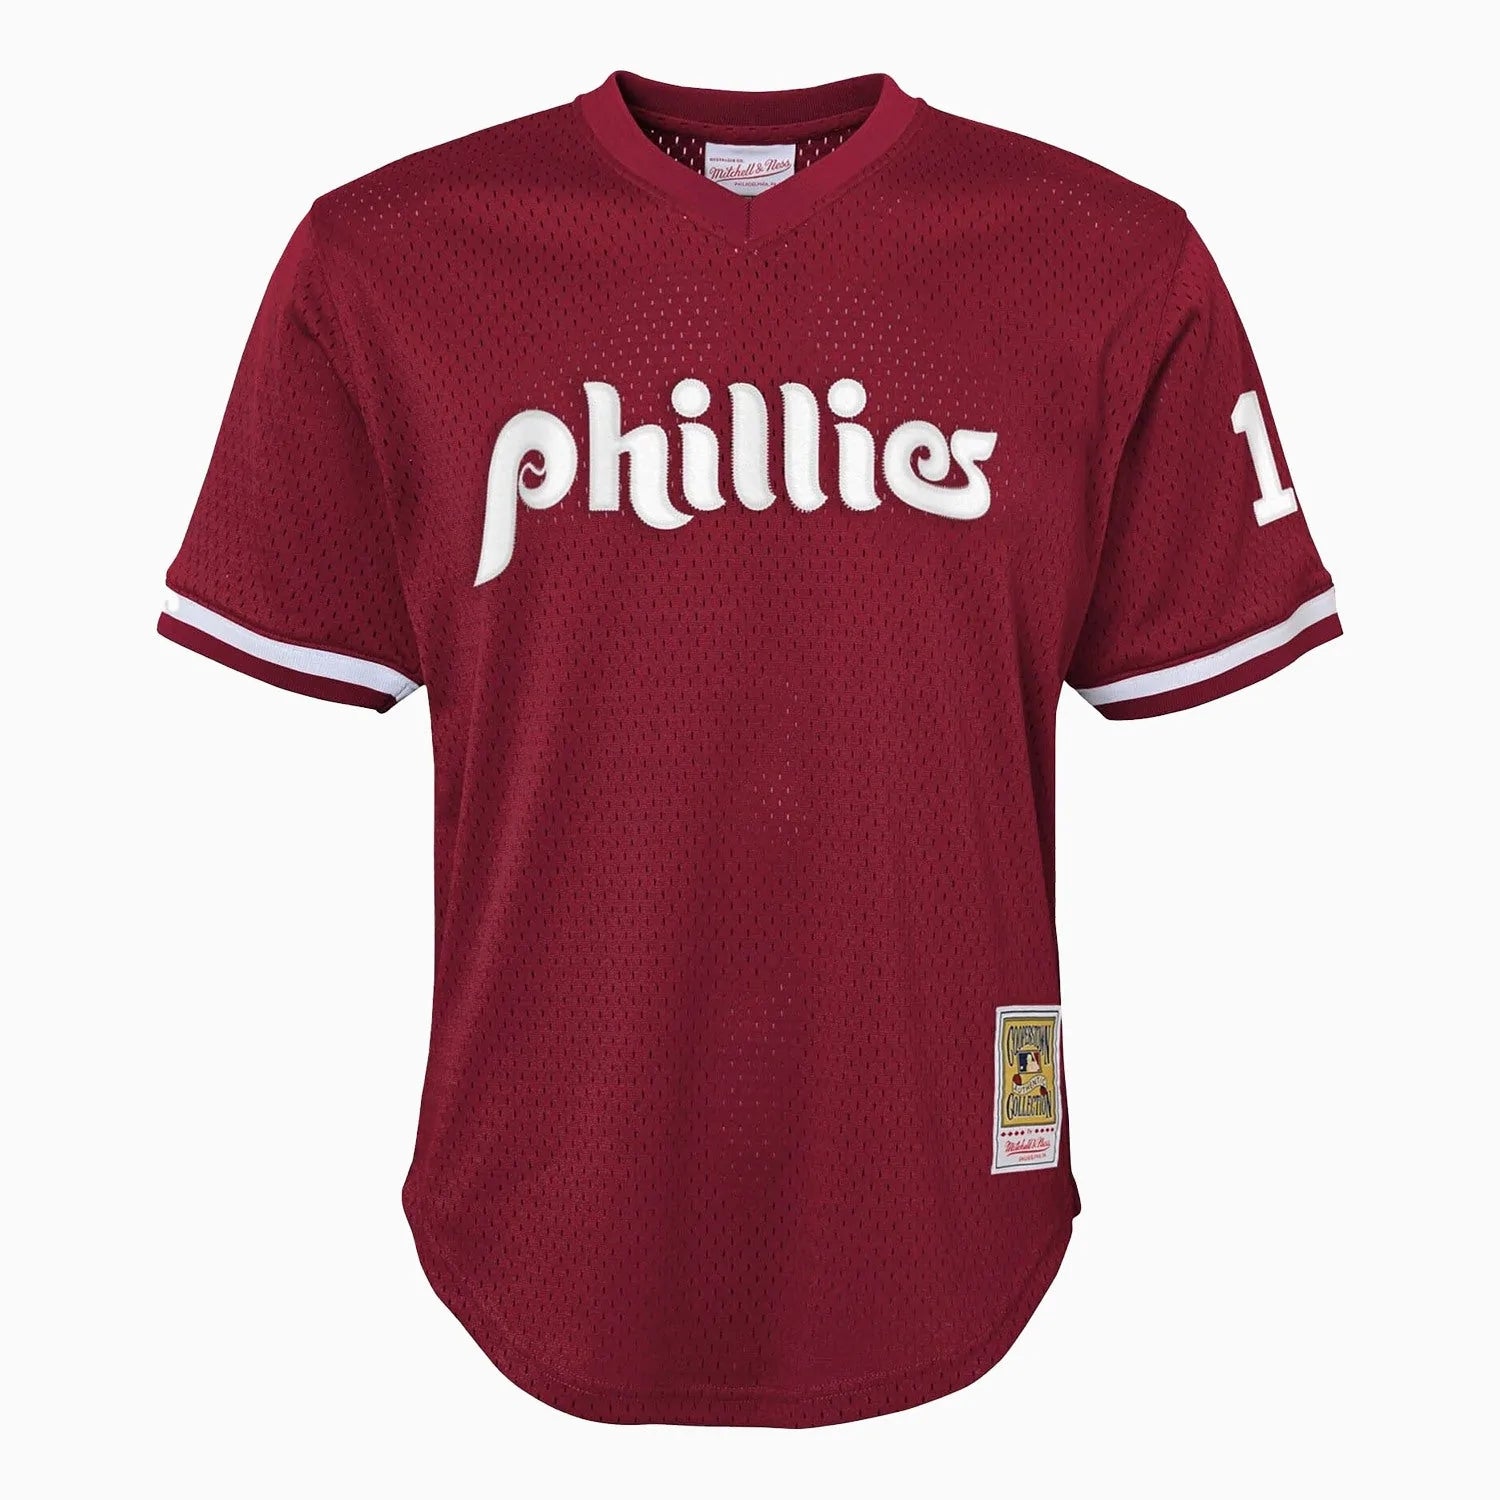 John Kruk Authentic Phillies Jersey with RARE #28 for Sale in West